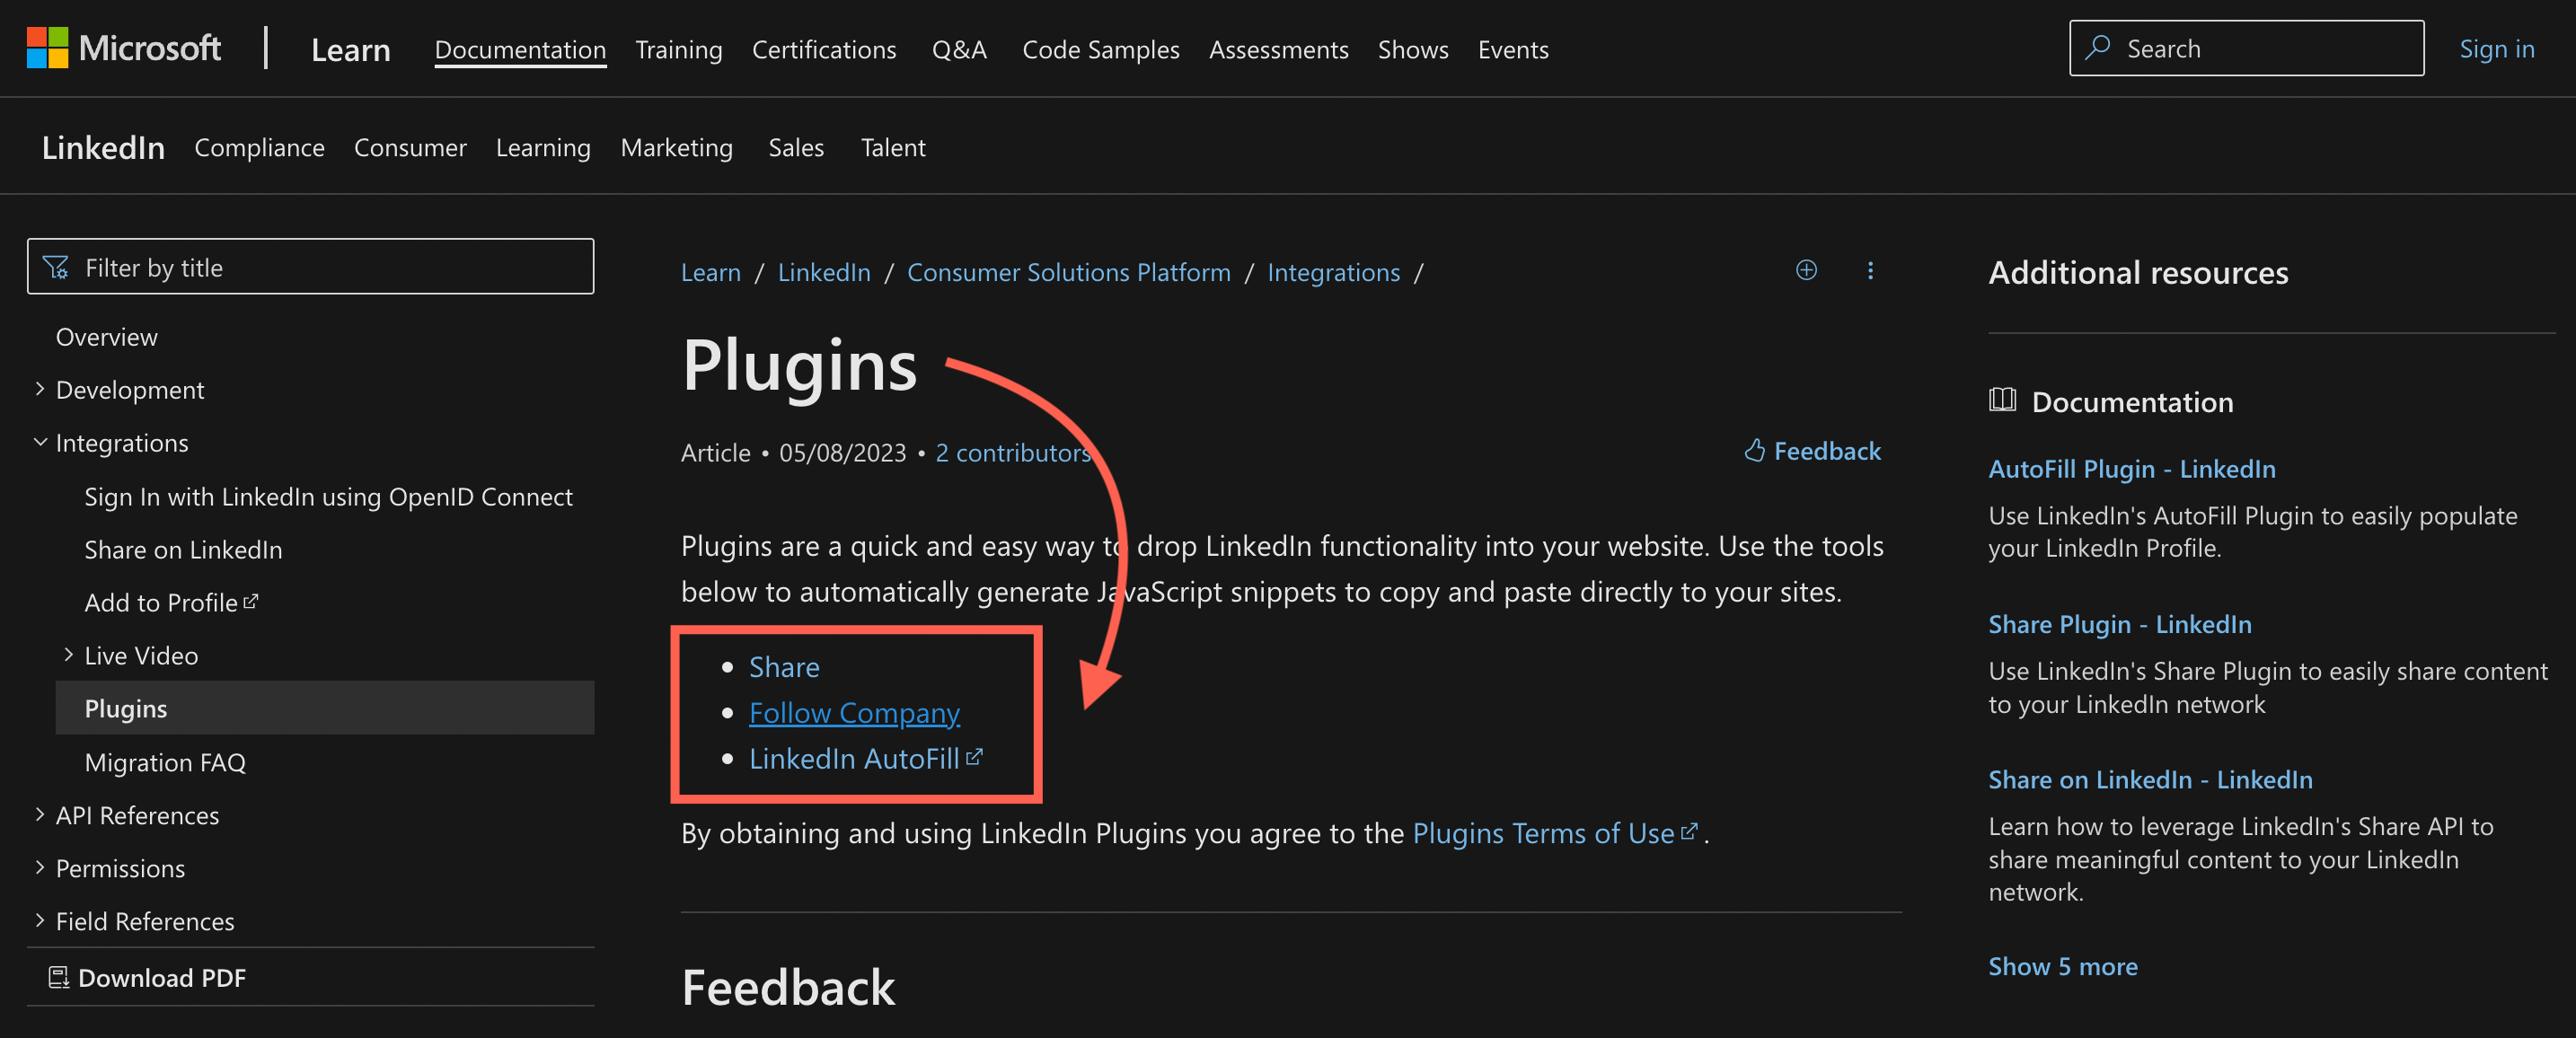 Microsoft offers these plugins.